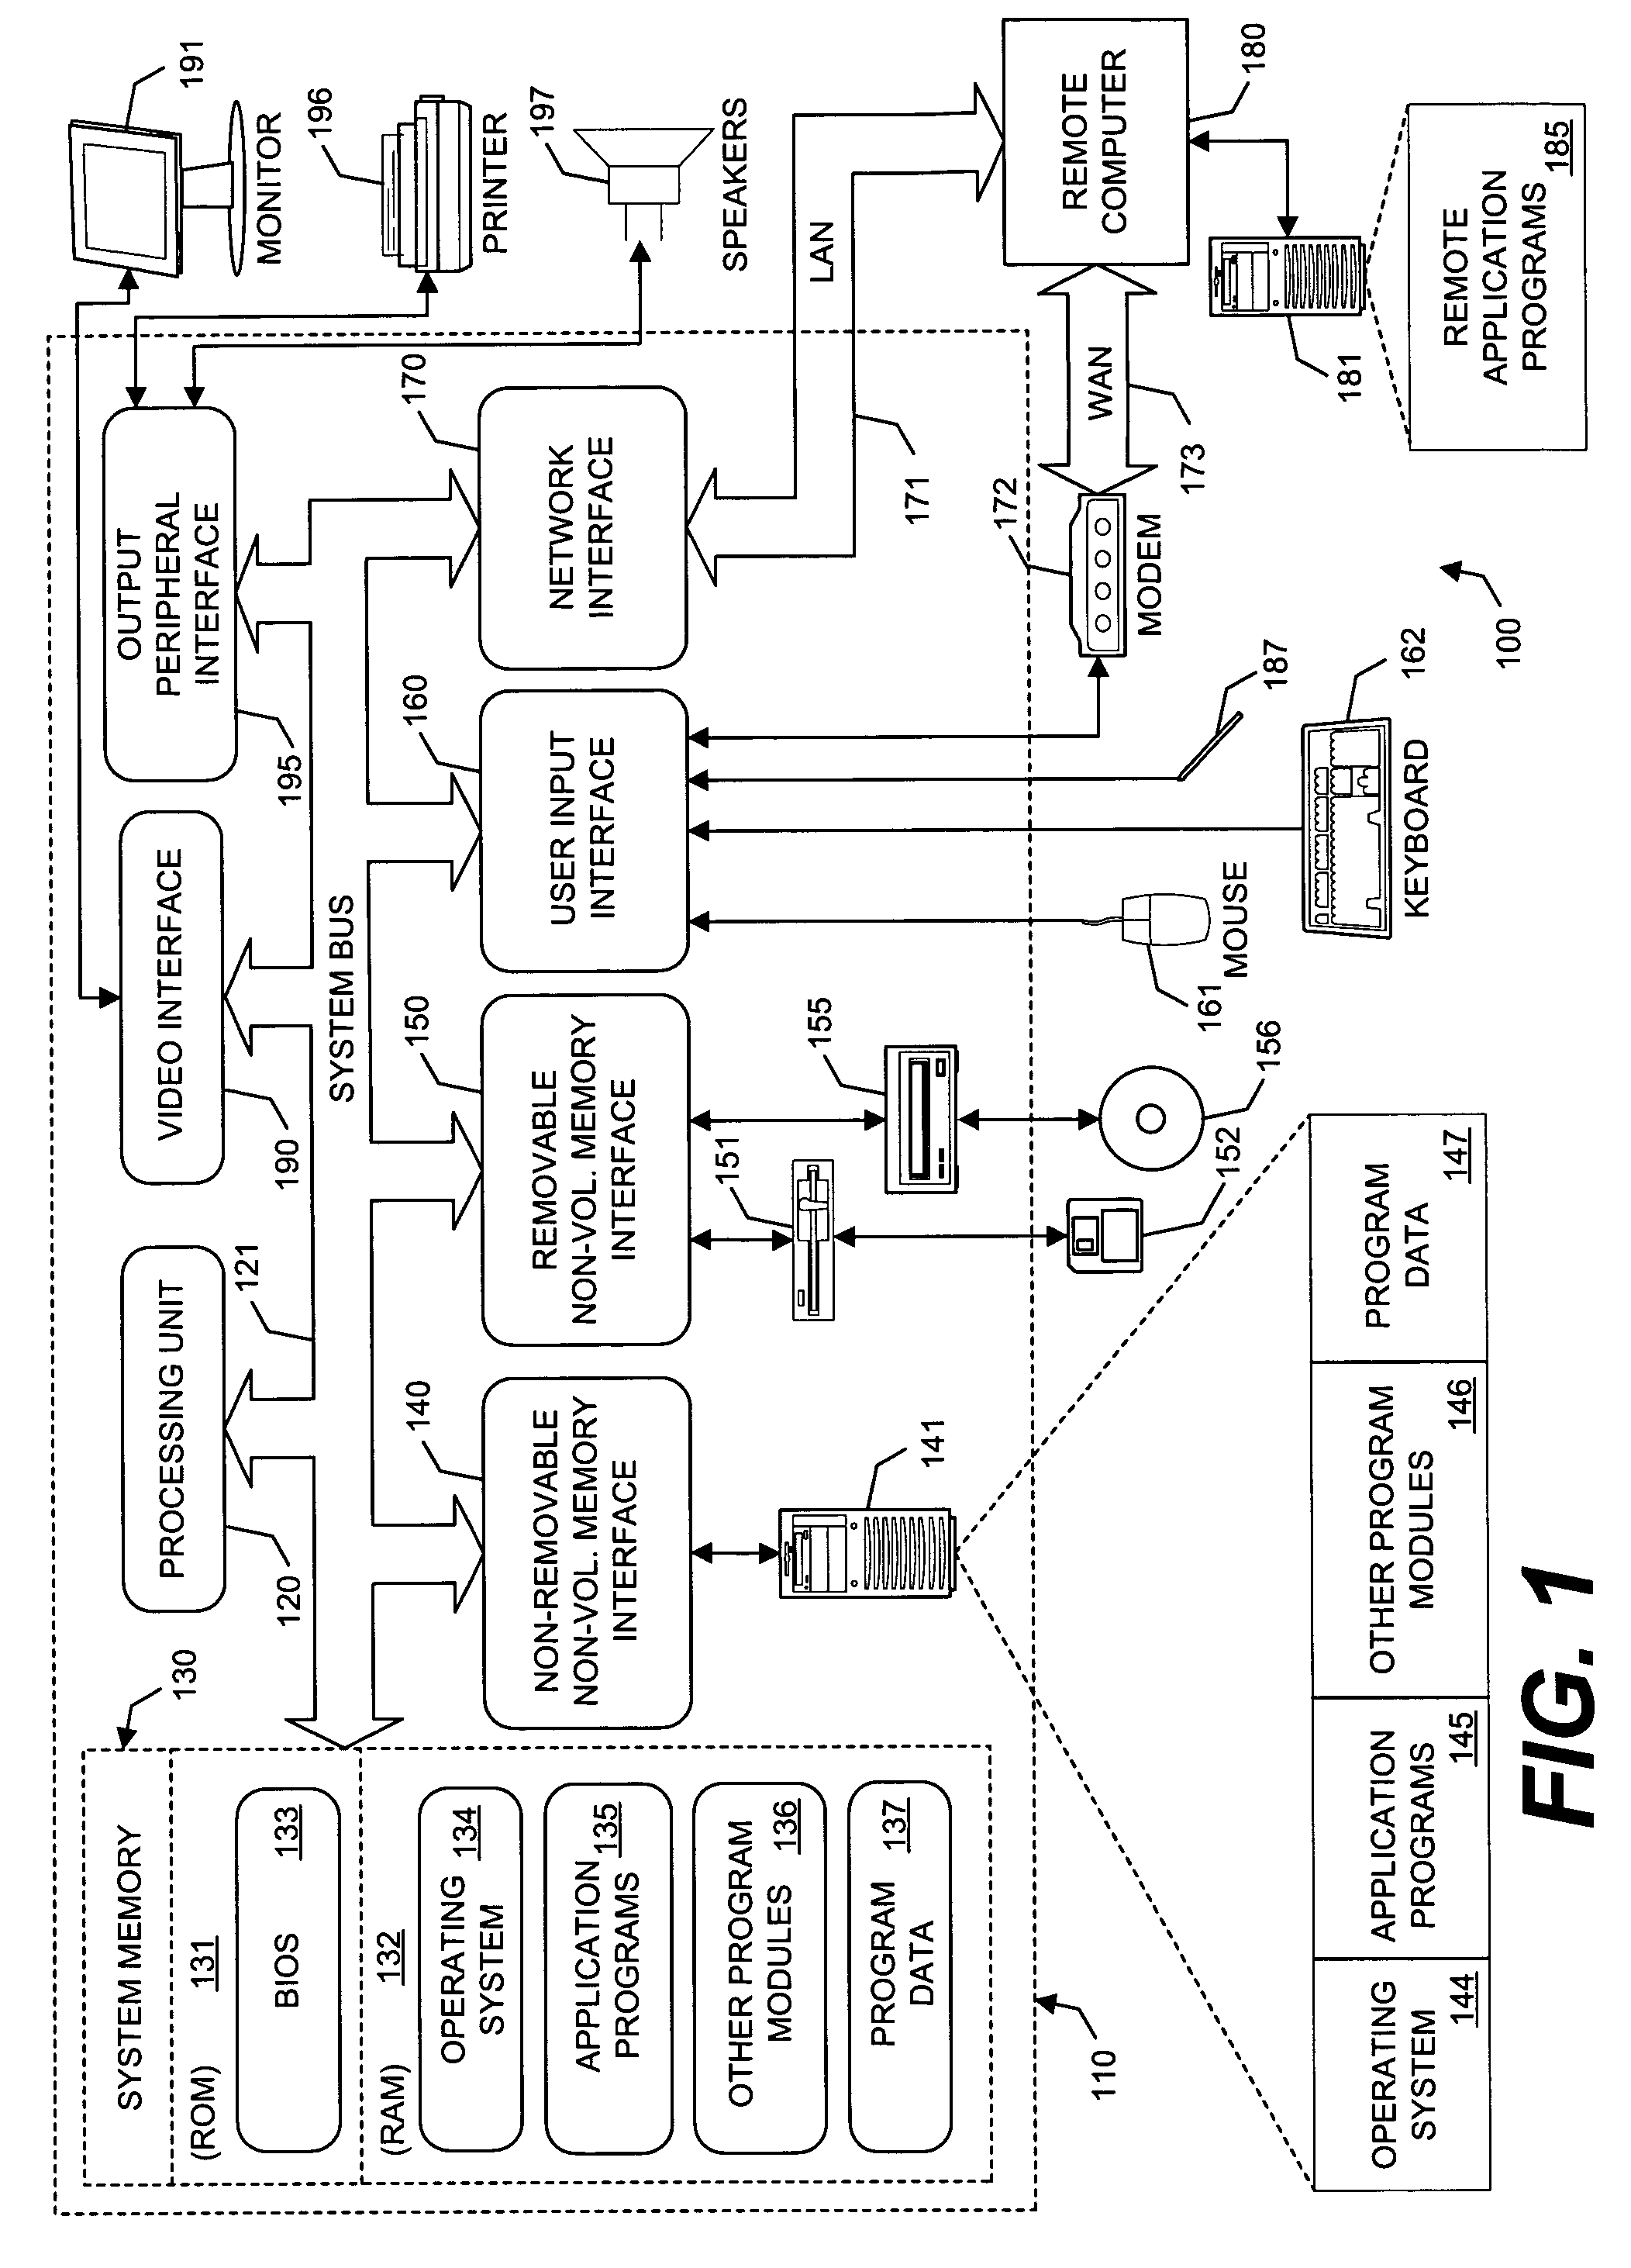 System and method for a large format collaborative display for sharing information